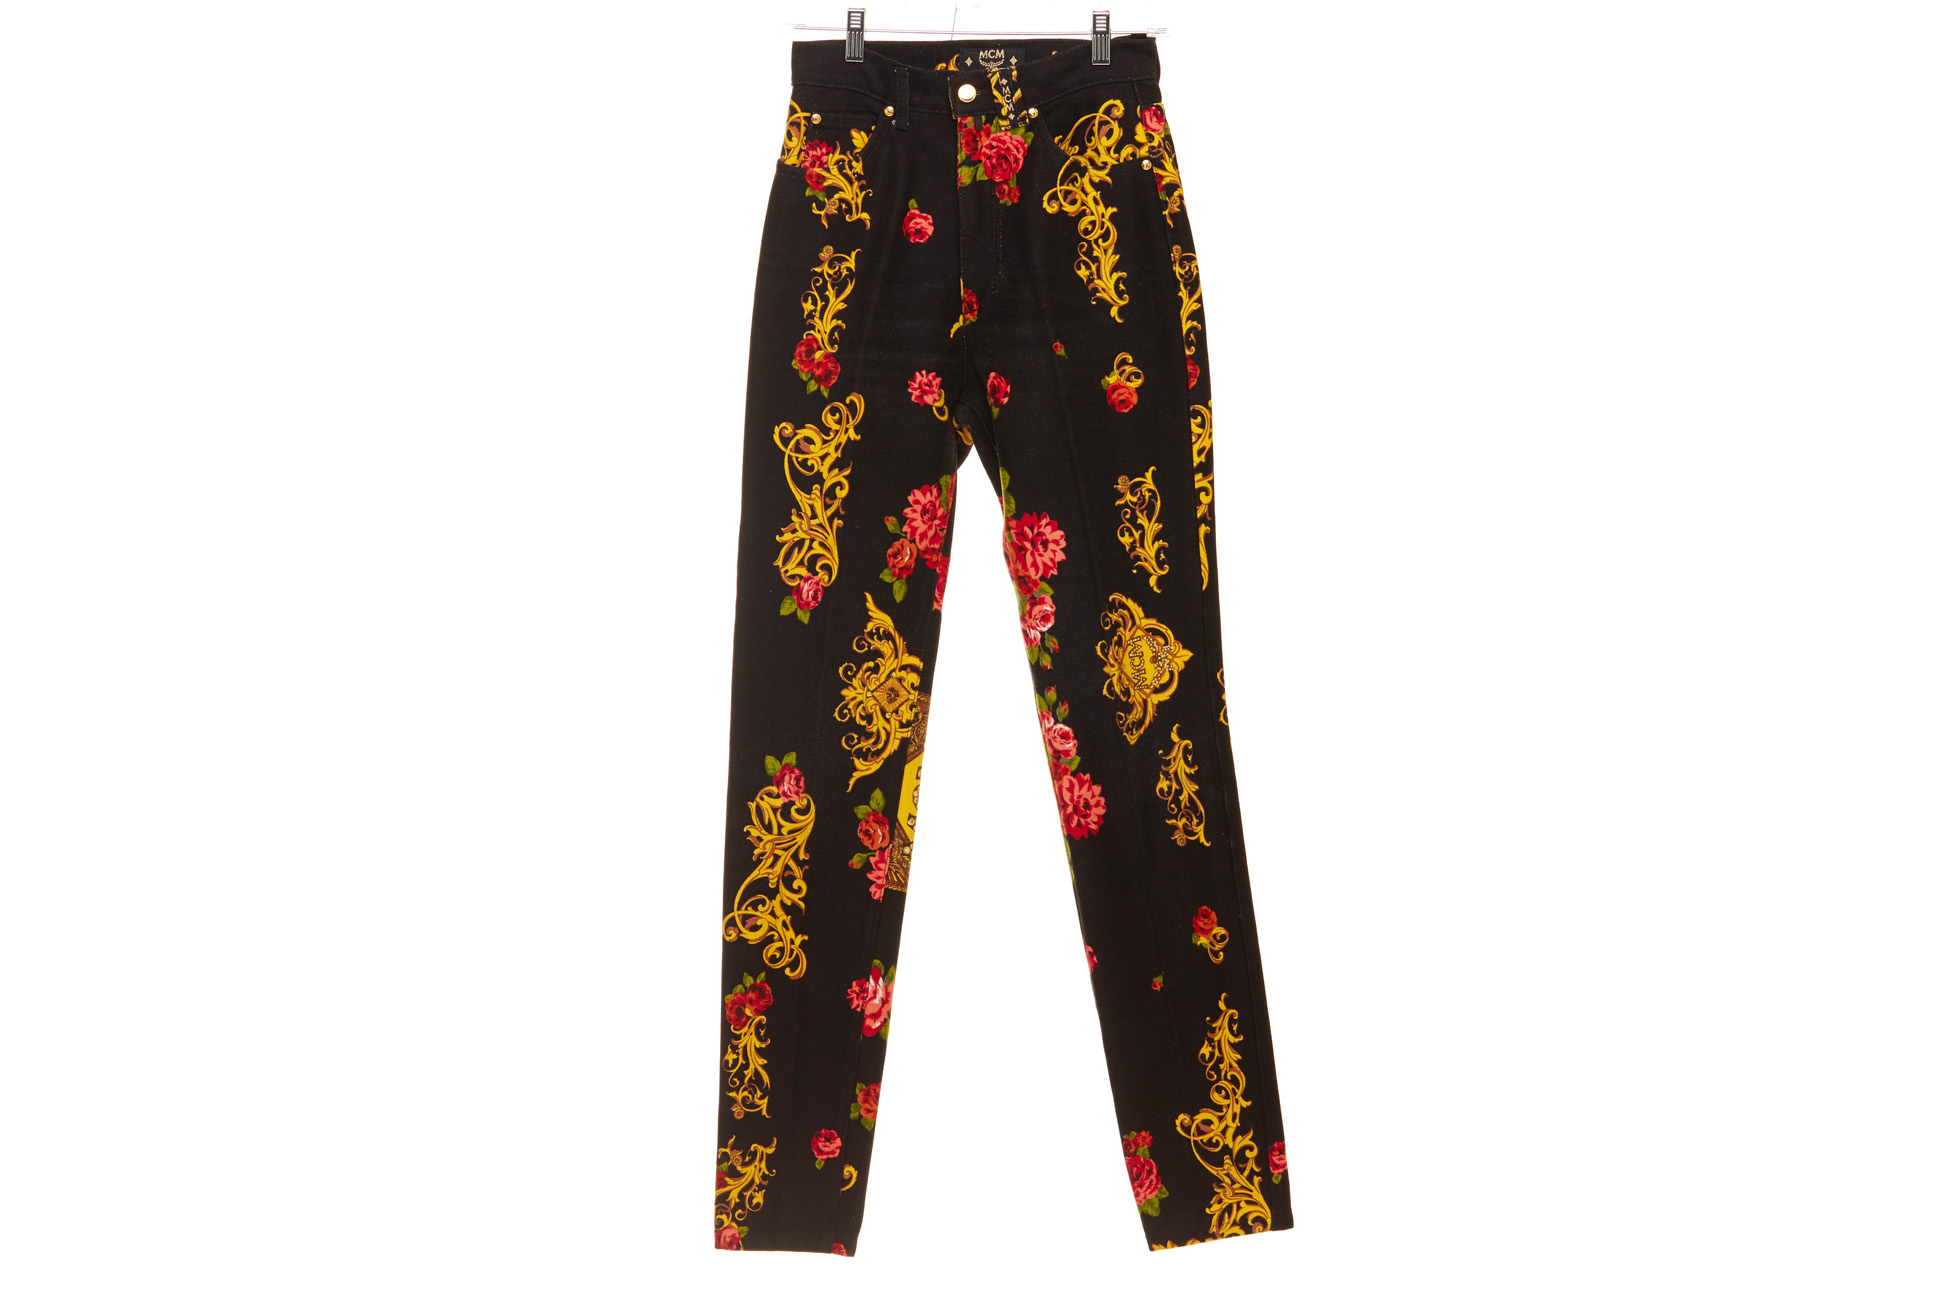 A PAIR OF MCM BAROQUE & FLORAL PRINTED JEANS